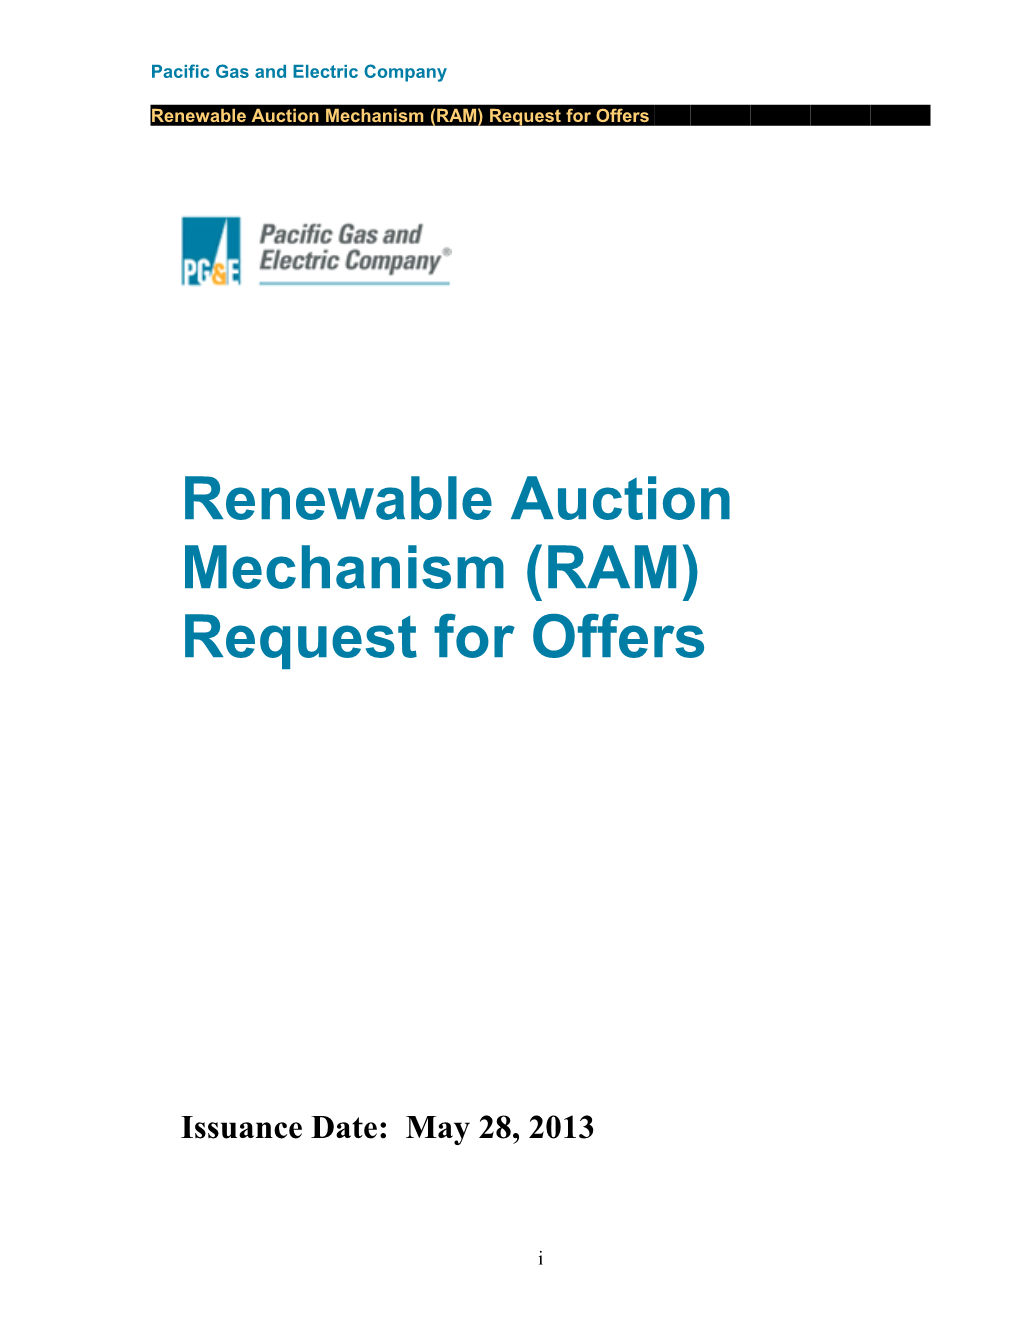 Renewable Auction Mechanism (RAM) Request for Offers